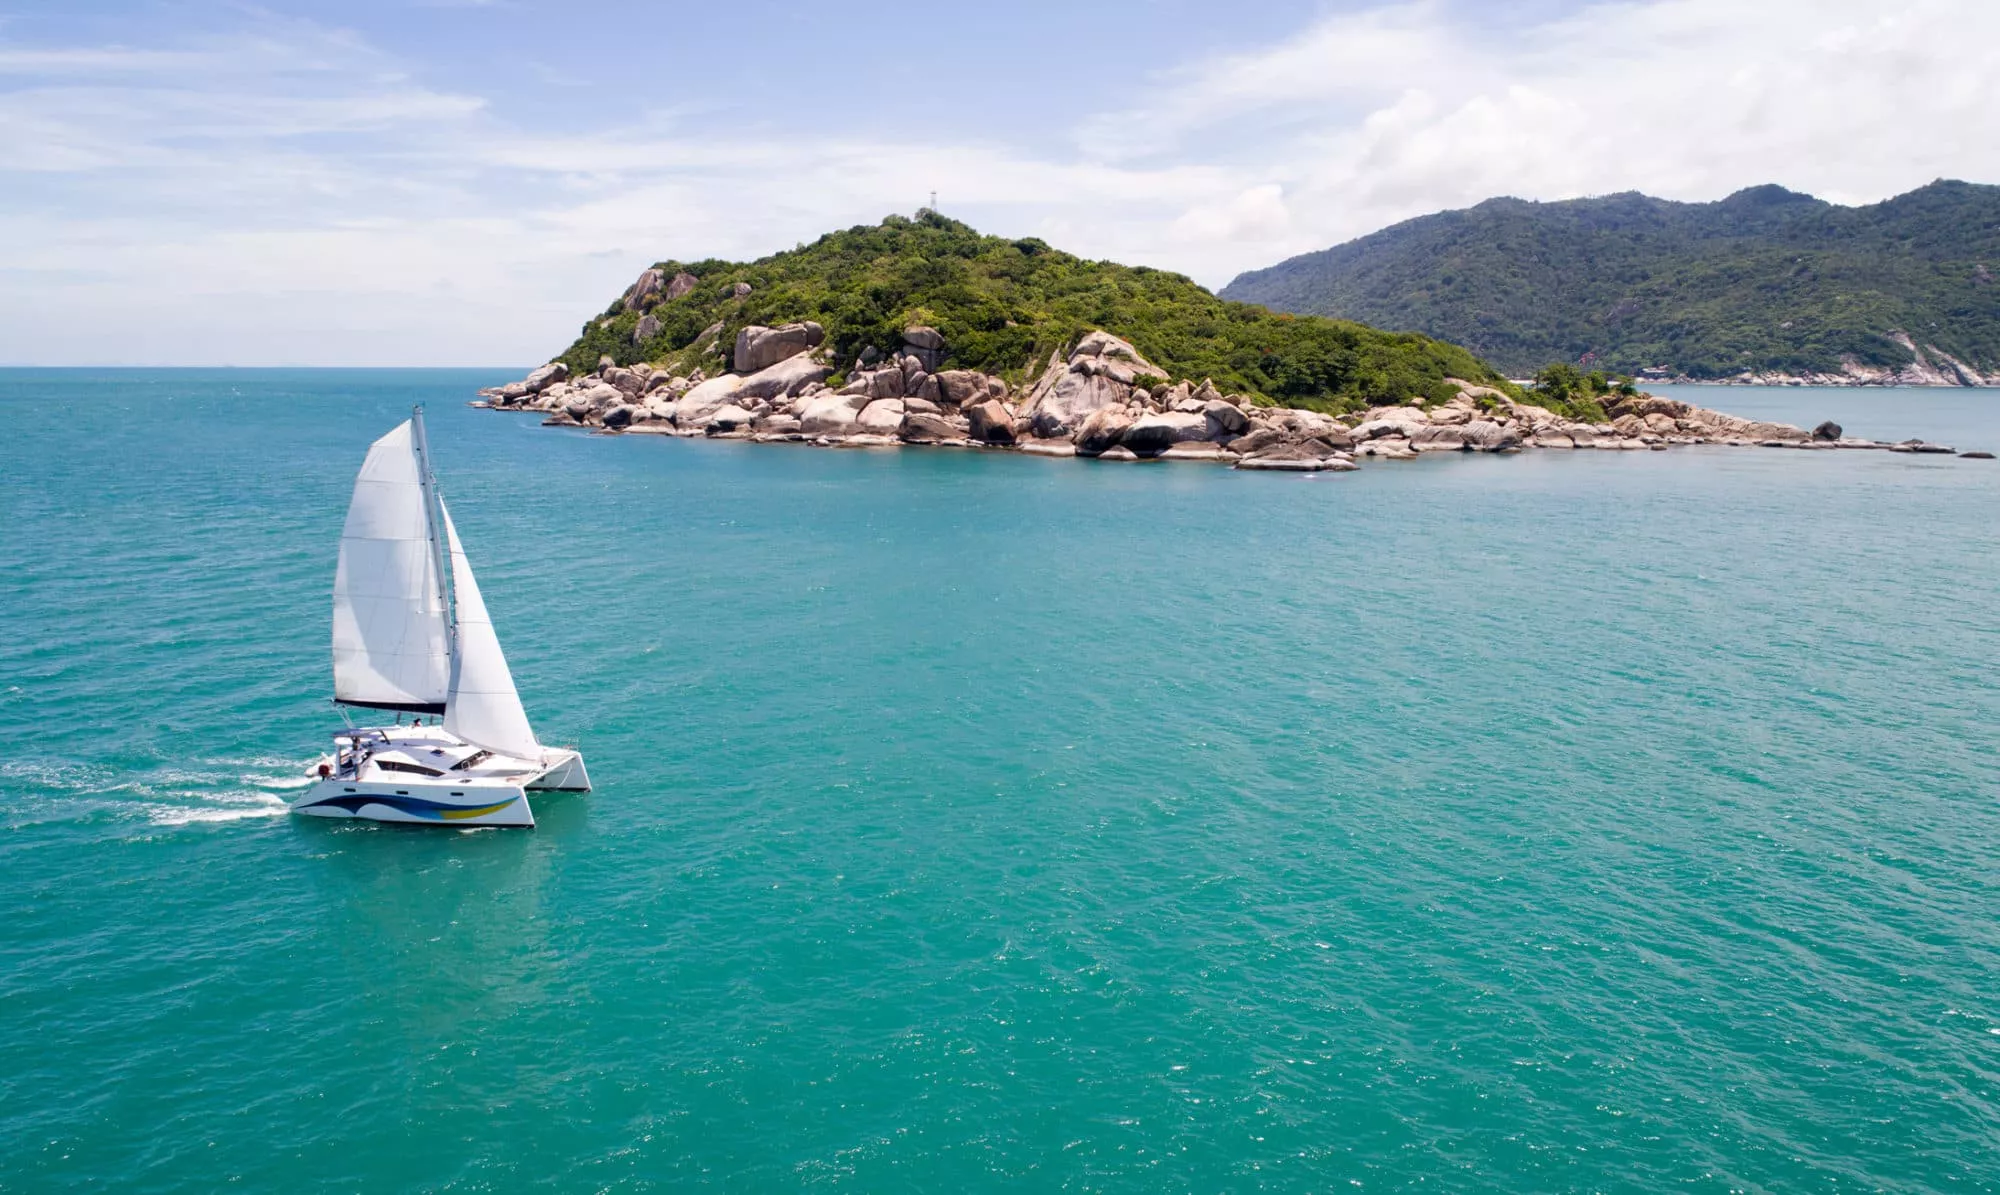 Island Spirit Sailing School Thailand in Thailand, Central Asia | Yachting - Rated 0.9